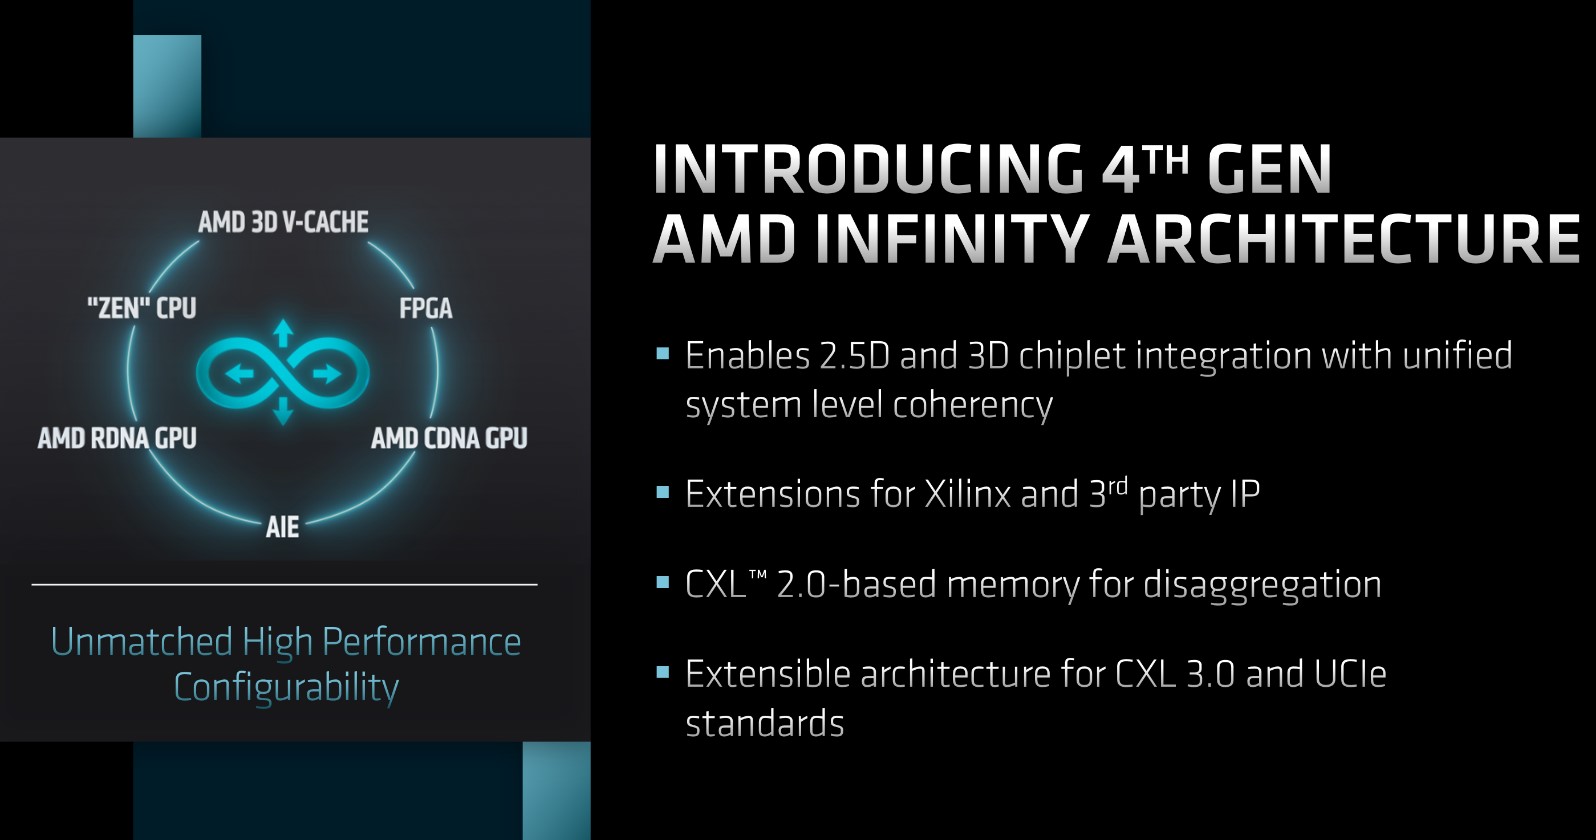 AMD FAD 2022 Design Innovation On High Performance Pace